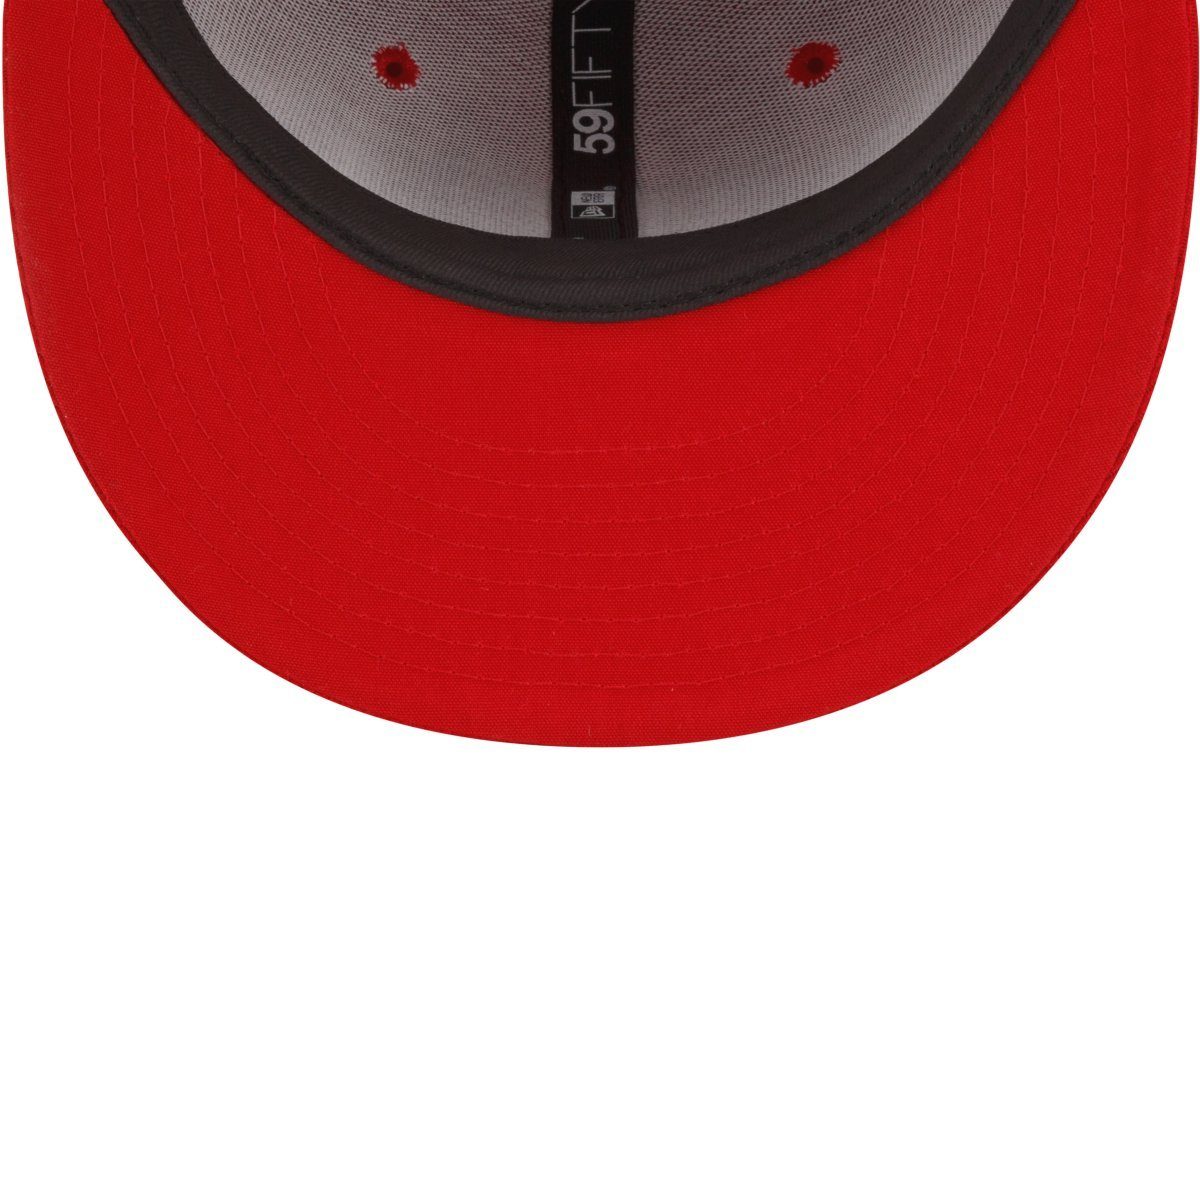 Los Cap Fitted MLB CLUBHOUSE 2022 New Teams Era Angels Angeles 59Fifty